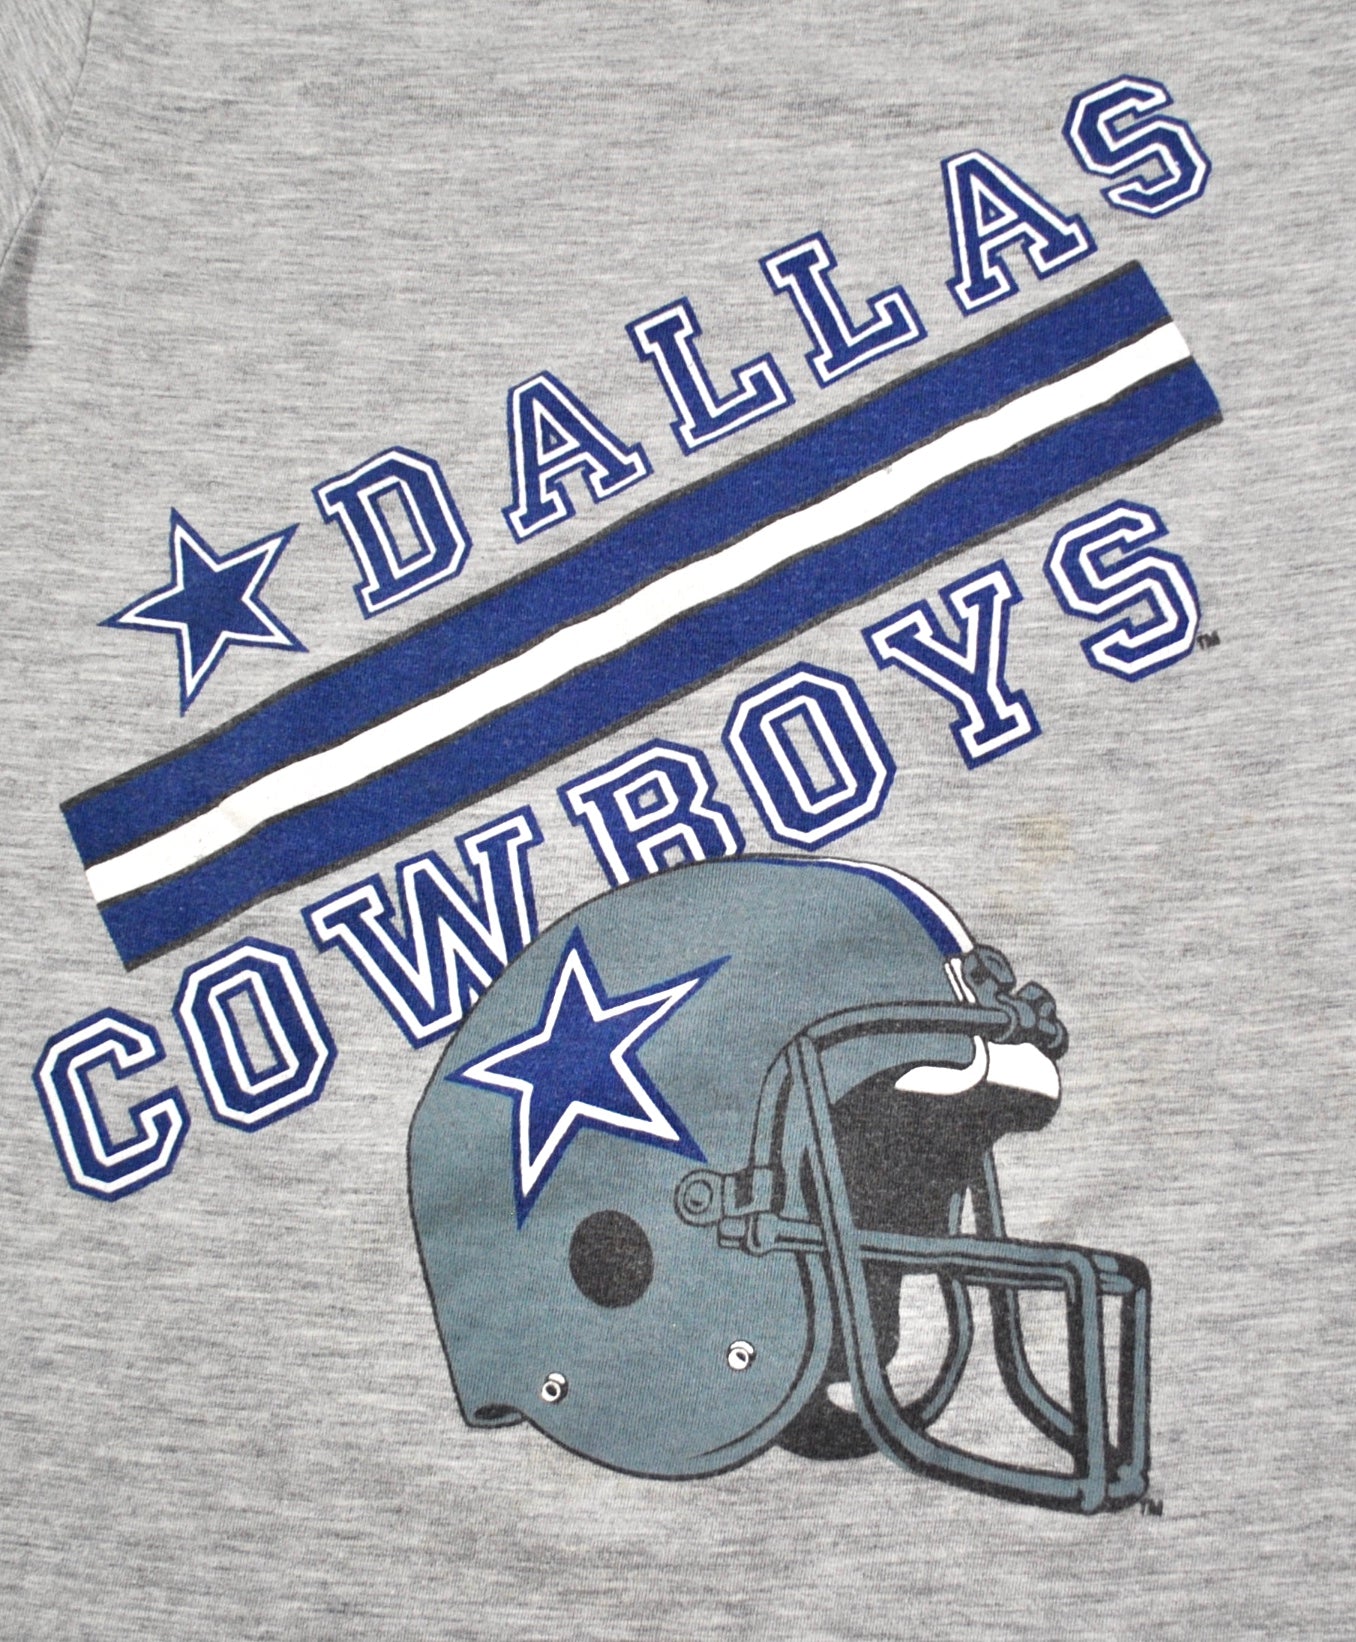 Vintage Dallas Cowboys Shirt Size Large – Yesterday's Attic